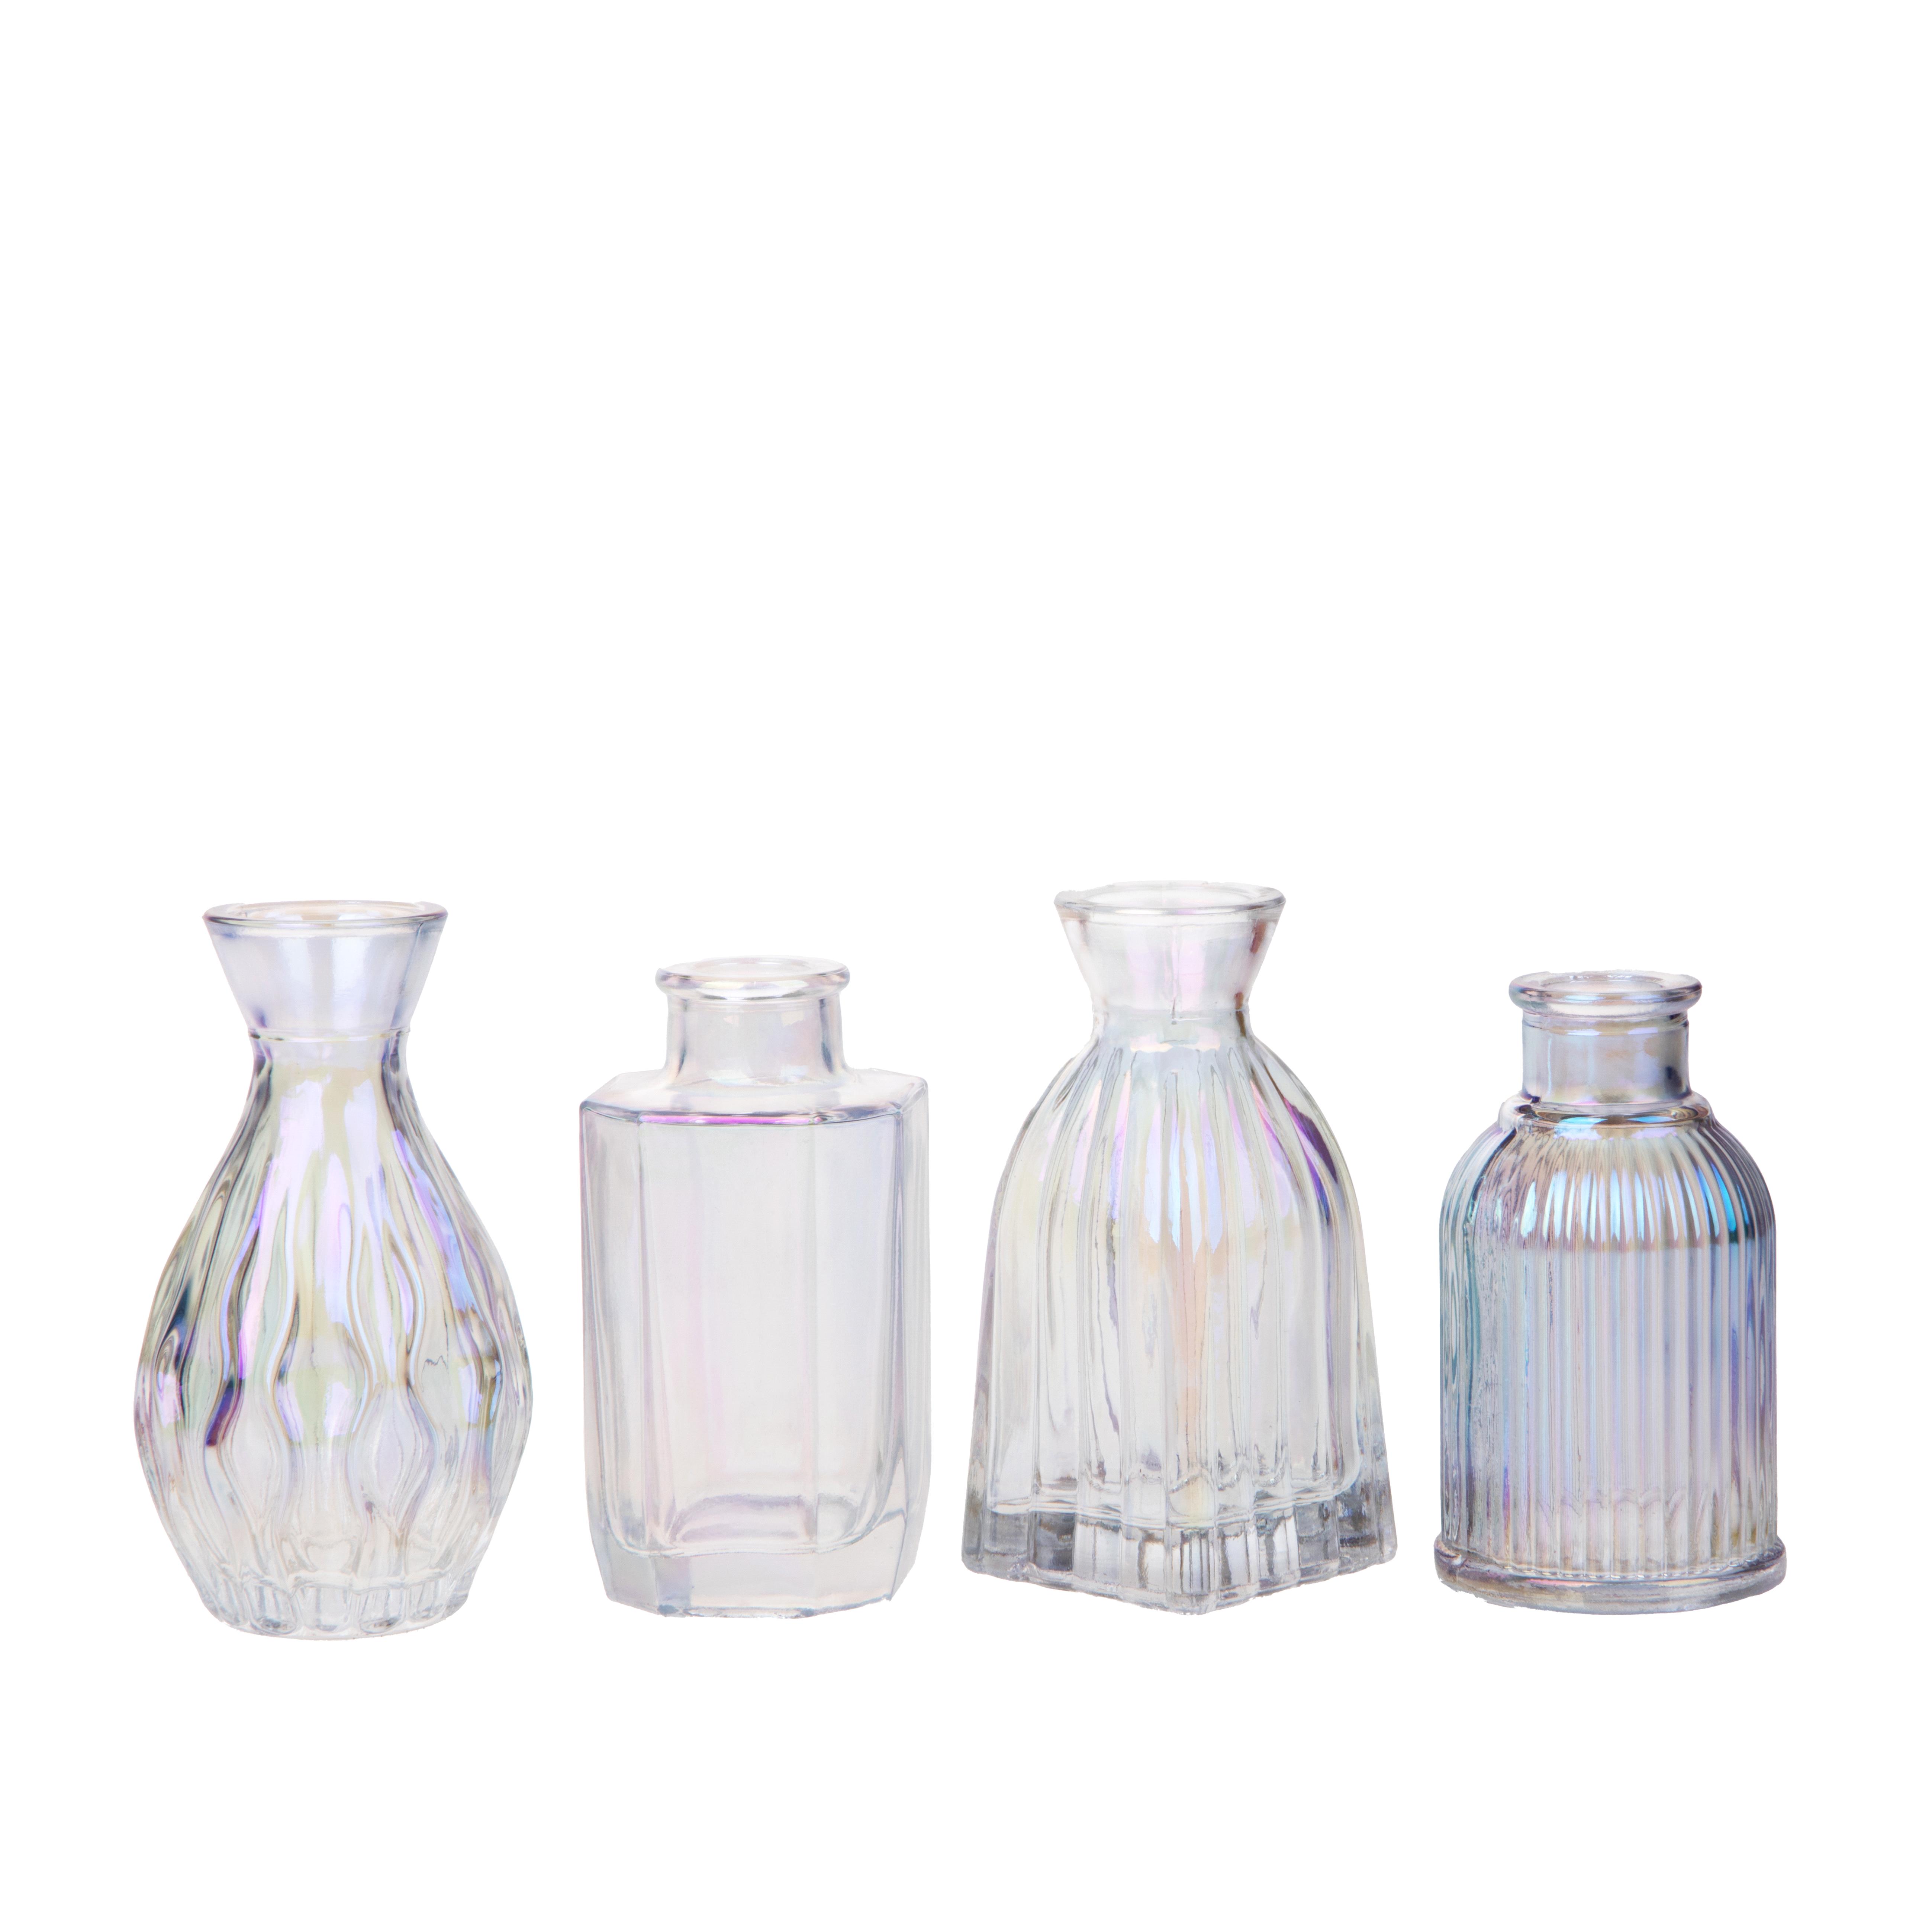 Home decors and accessories, GLASS VASES, SET/4 VASETTI 11 CM C.A.